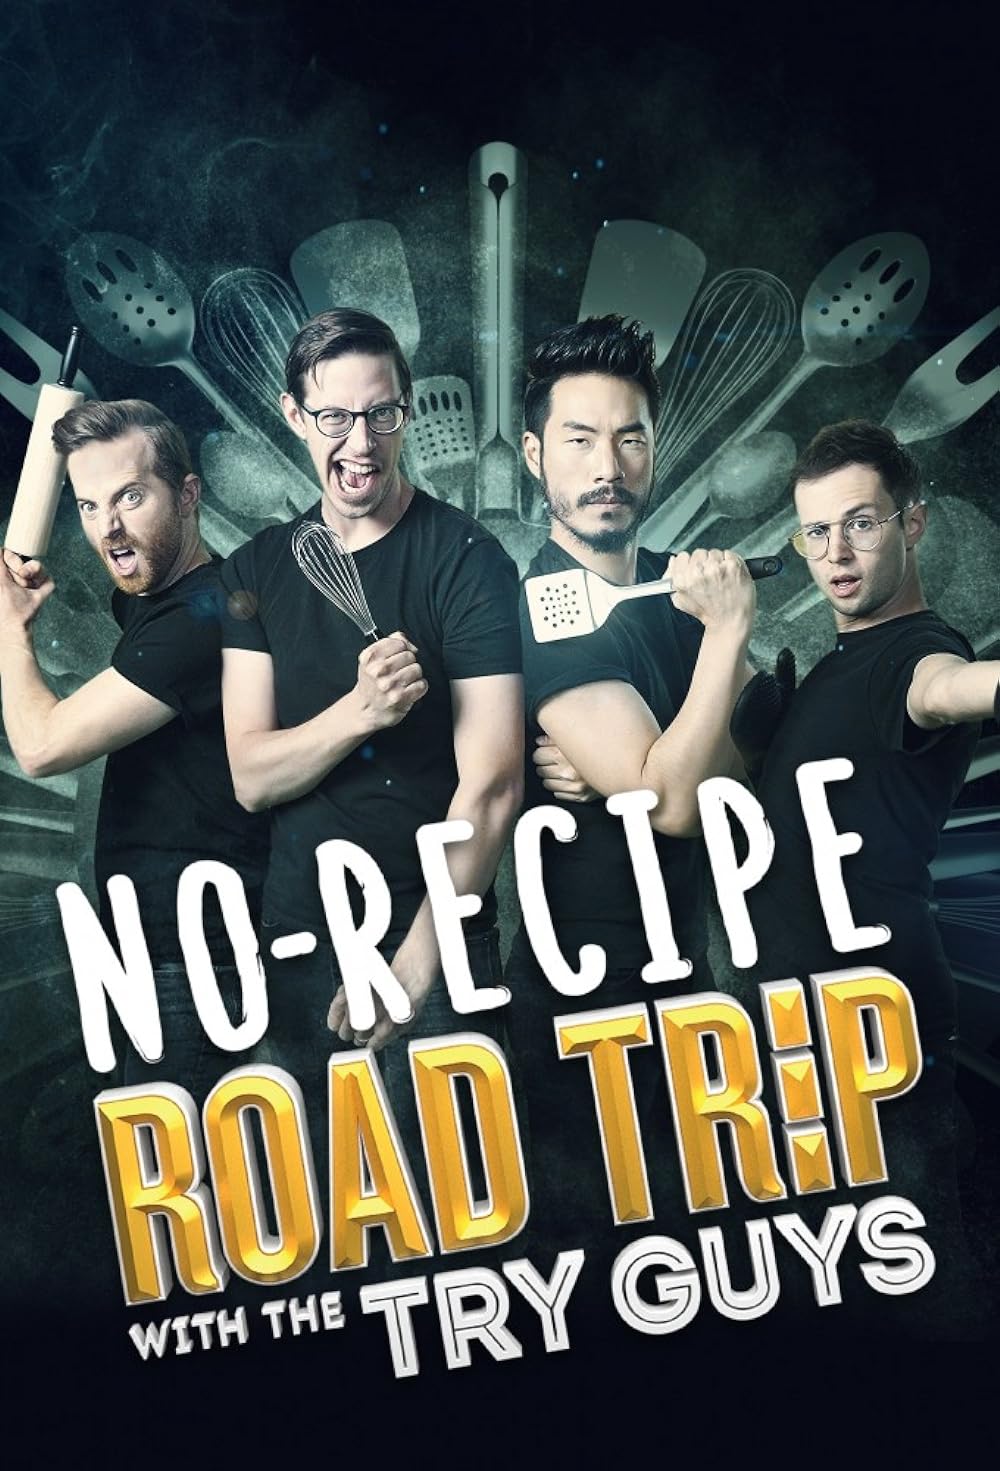 No Recipe Road Trip with the Try Guys